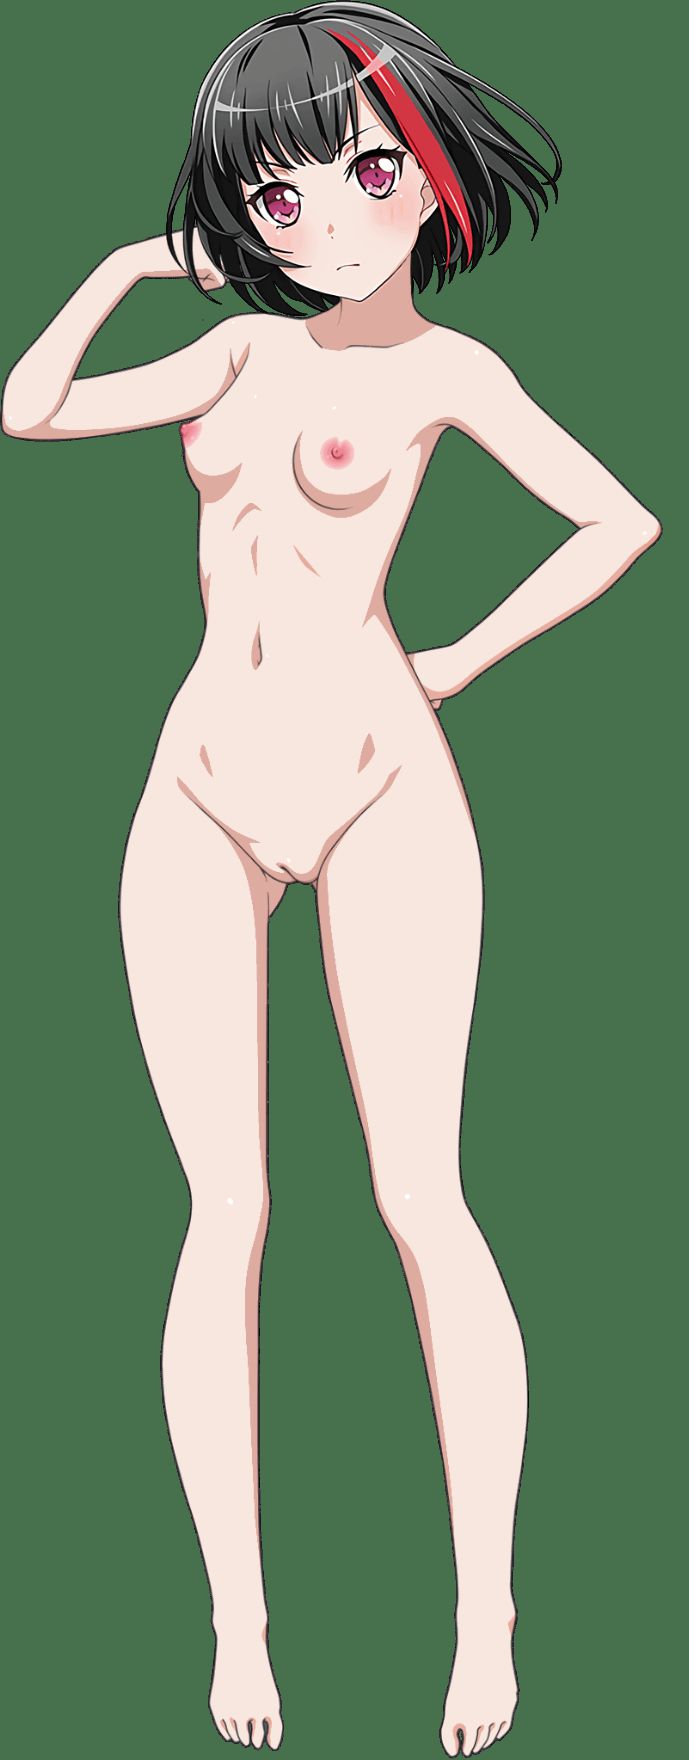 【Erocora Character Material】PNG background transparent erotic image such as anime characters Part 421 20